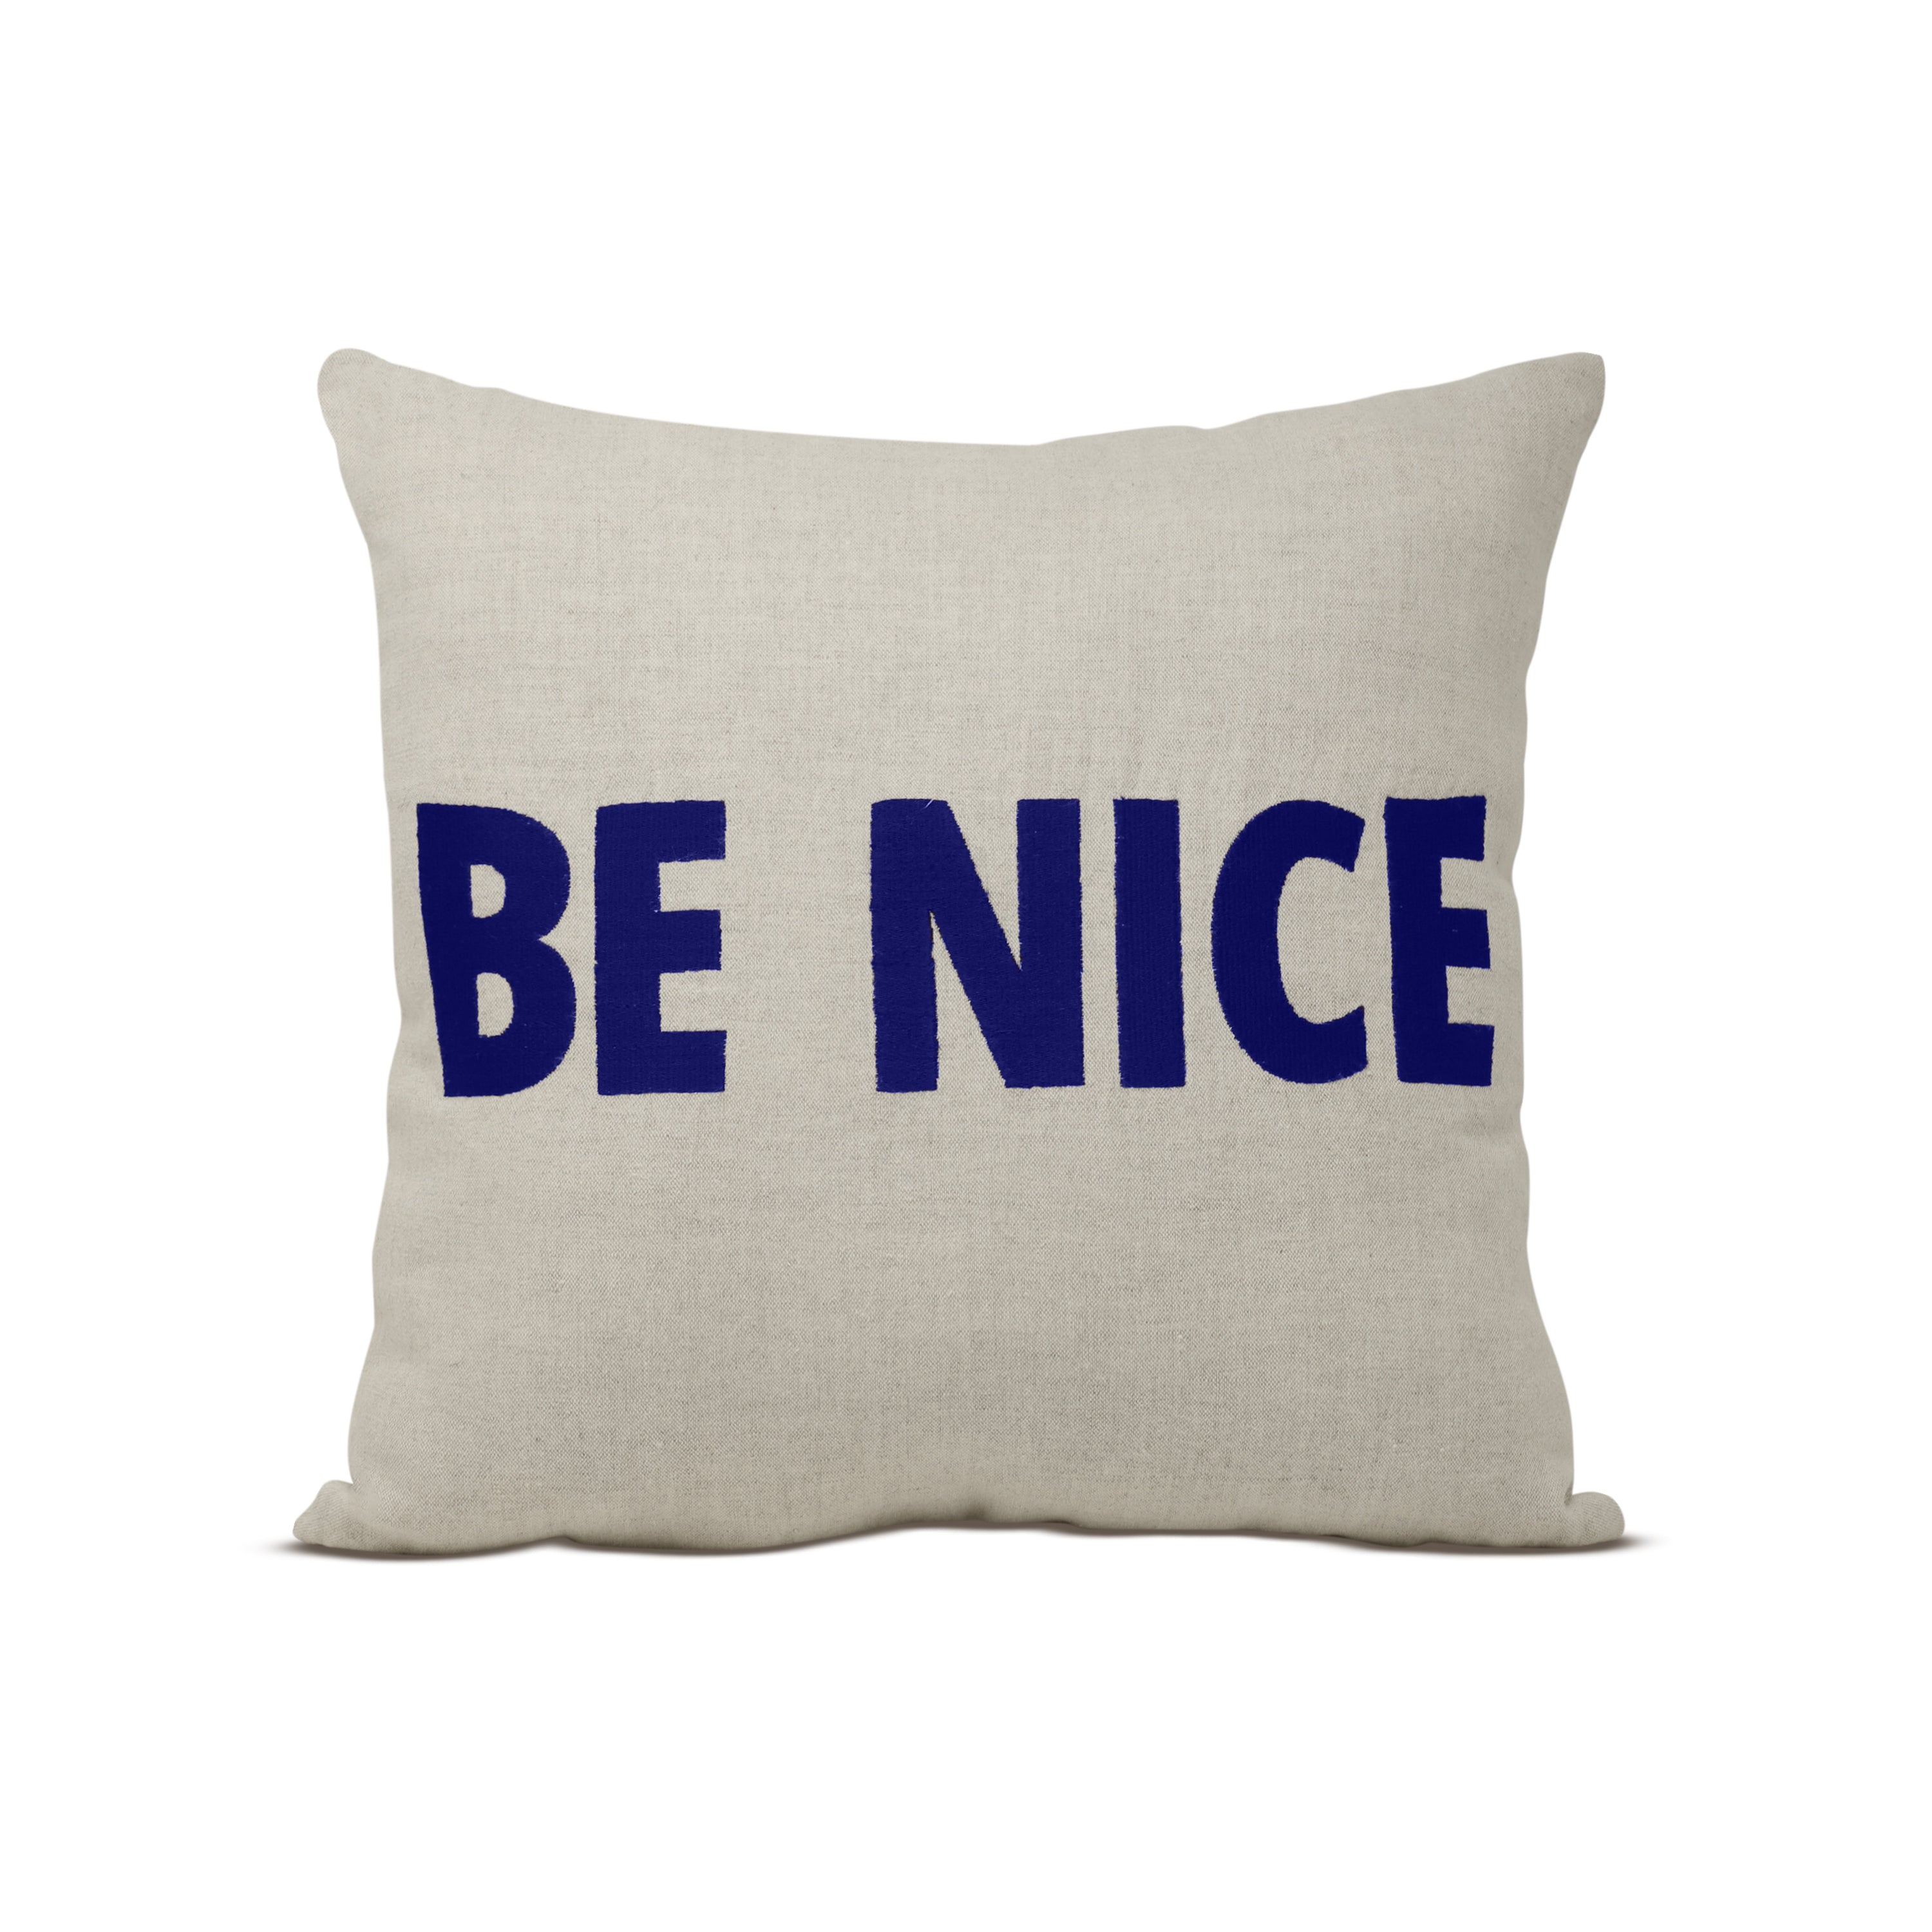 Be Nice Pillow Cover, Custom Message Pillow Case